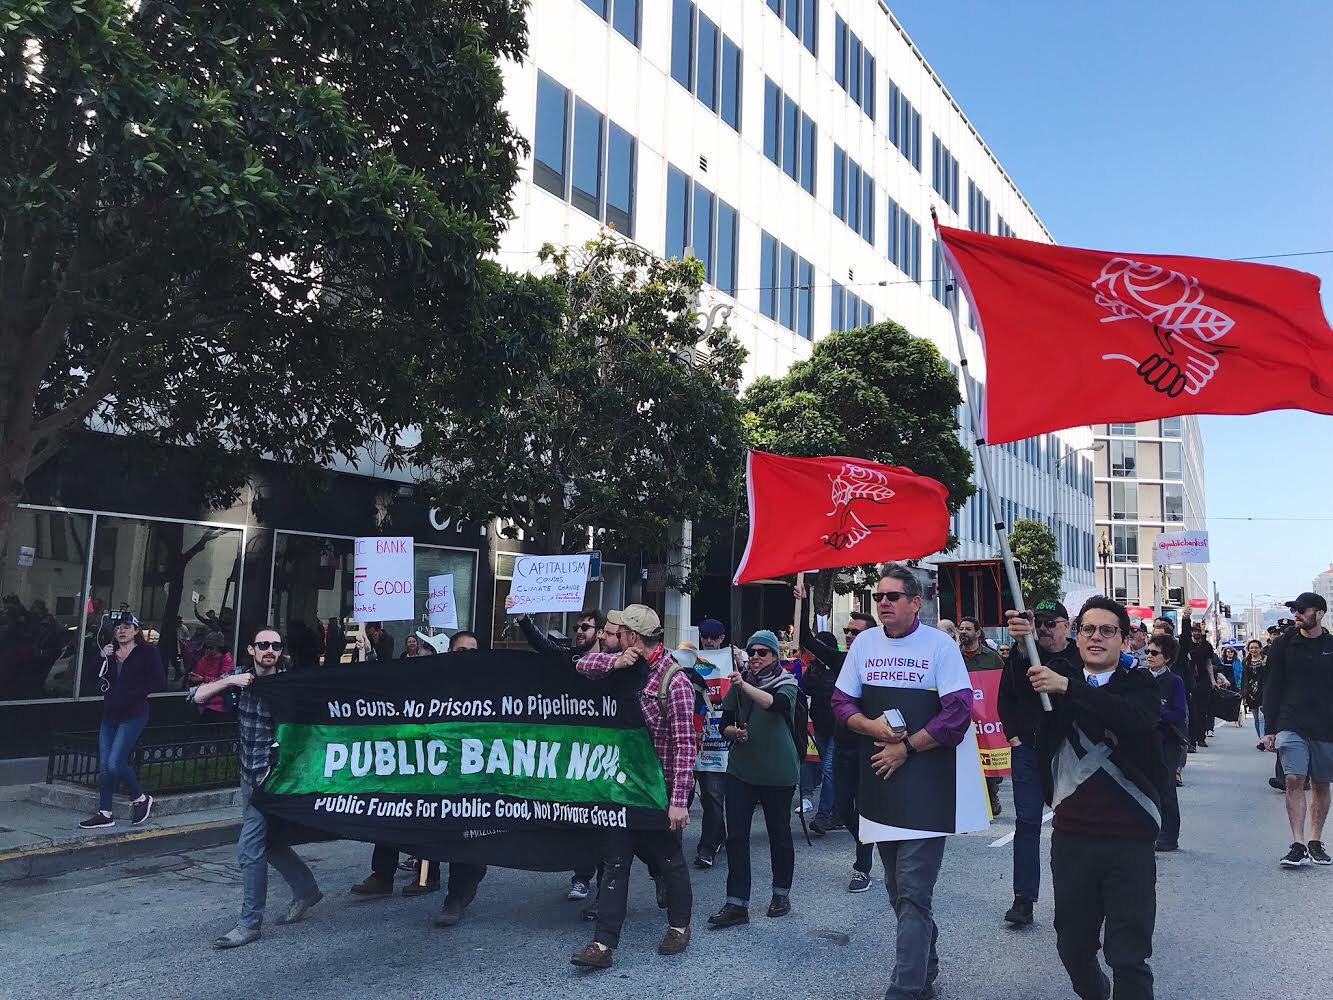 Members of the San Francisco Public Bank Coalition march to San Francisco City Hall to demand the city divest from Wall Street and create a public bank. - KURTIS WU